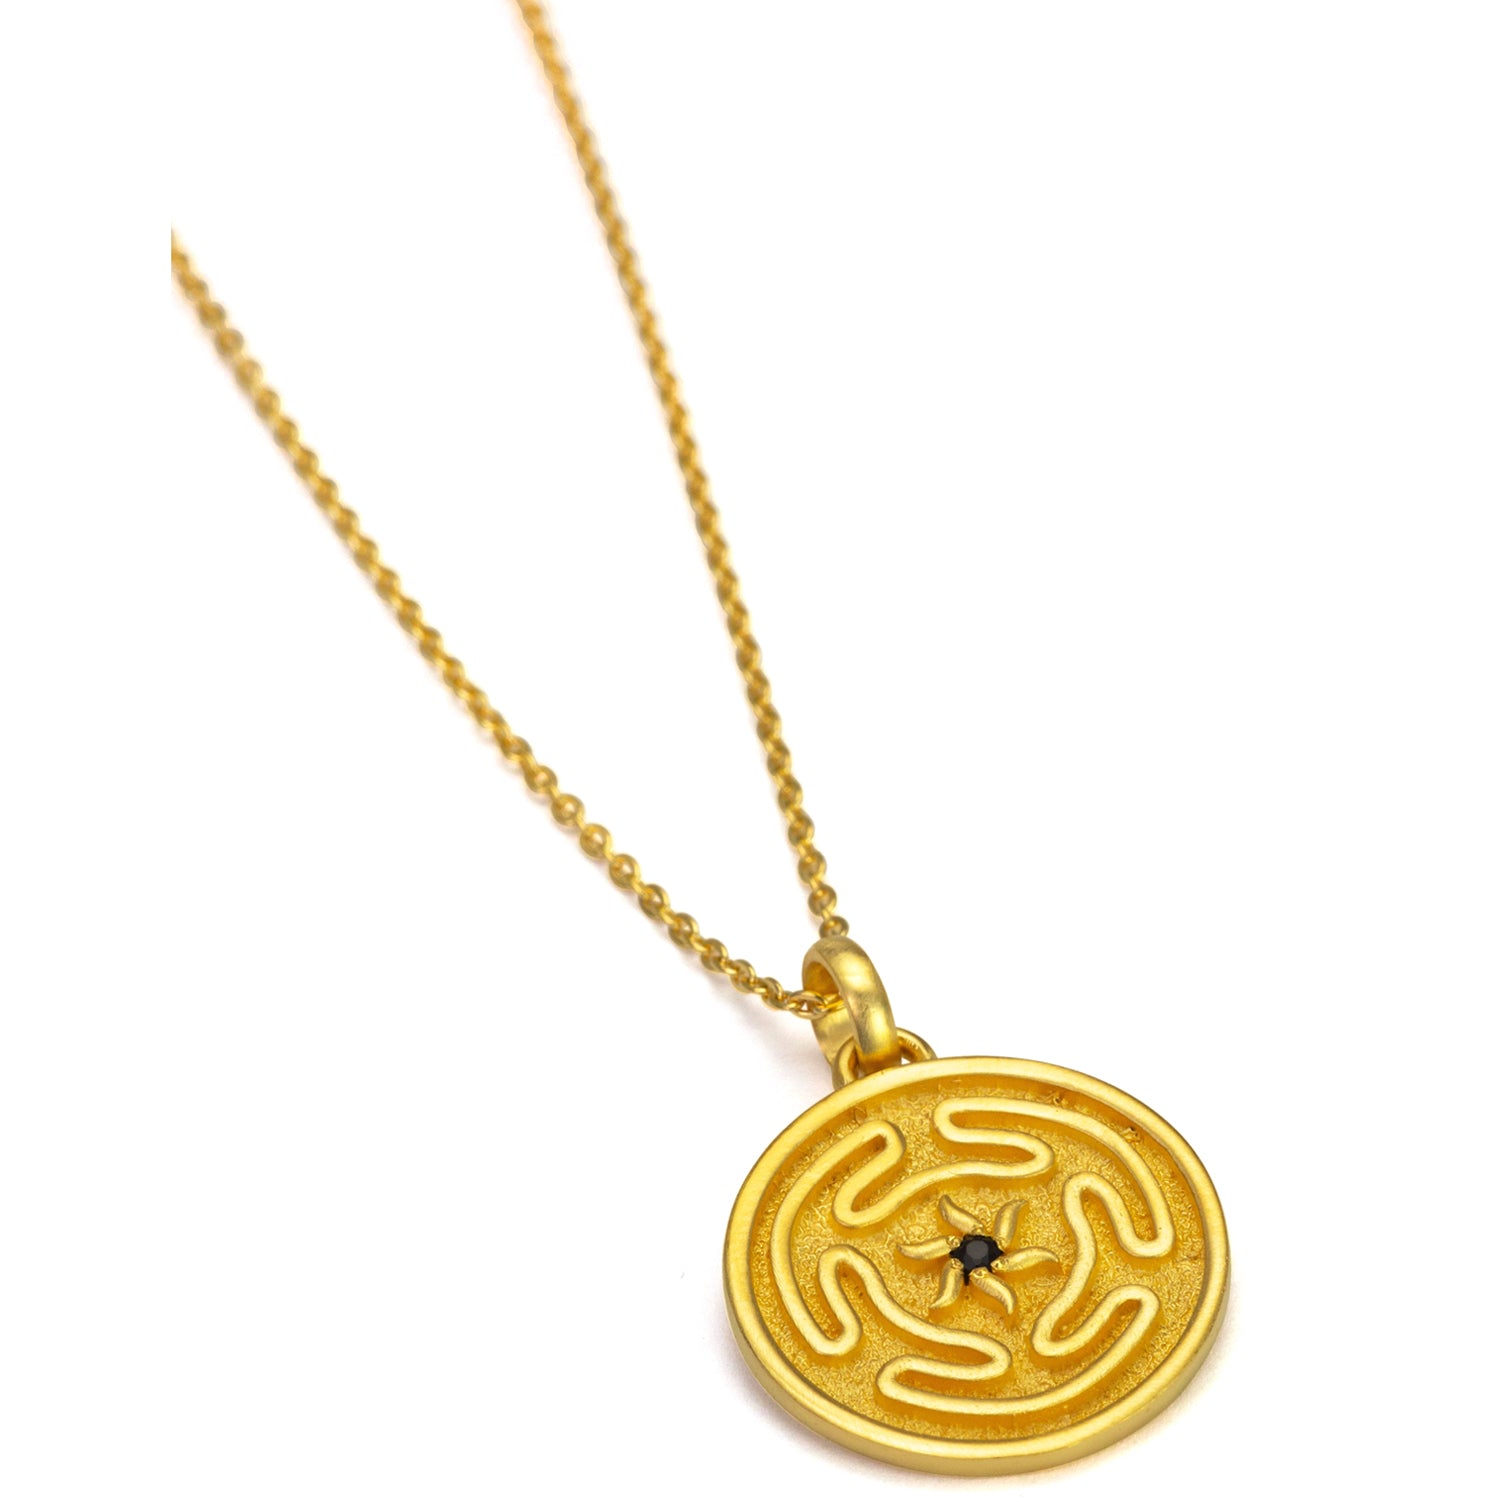 Hecate's wheel pendant with onyx made of high-quality gold-plated sterling silver